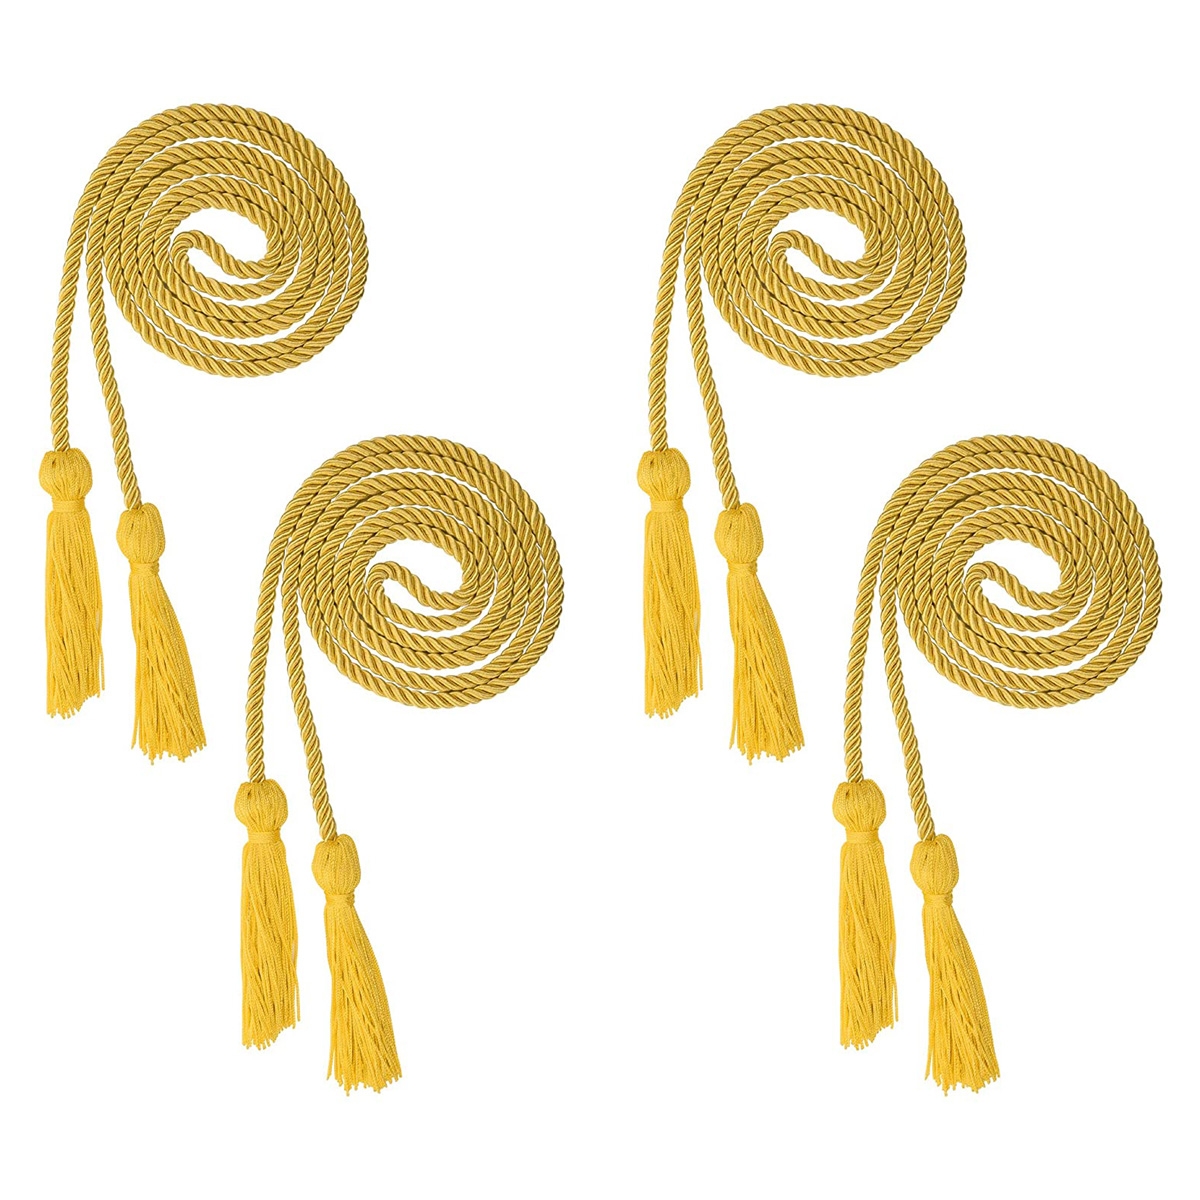 Braided Cords with Sewing Tassels Polyester Yarn Honor Cord for Bachelor Gown for Graduation Student